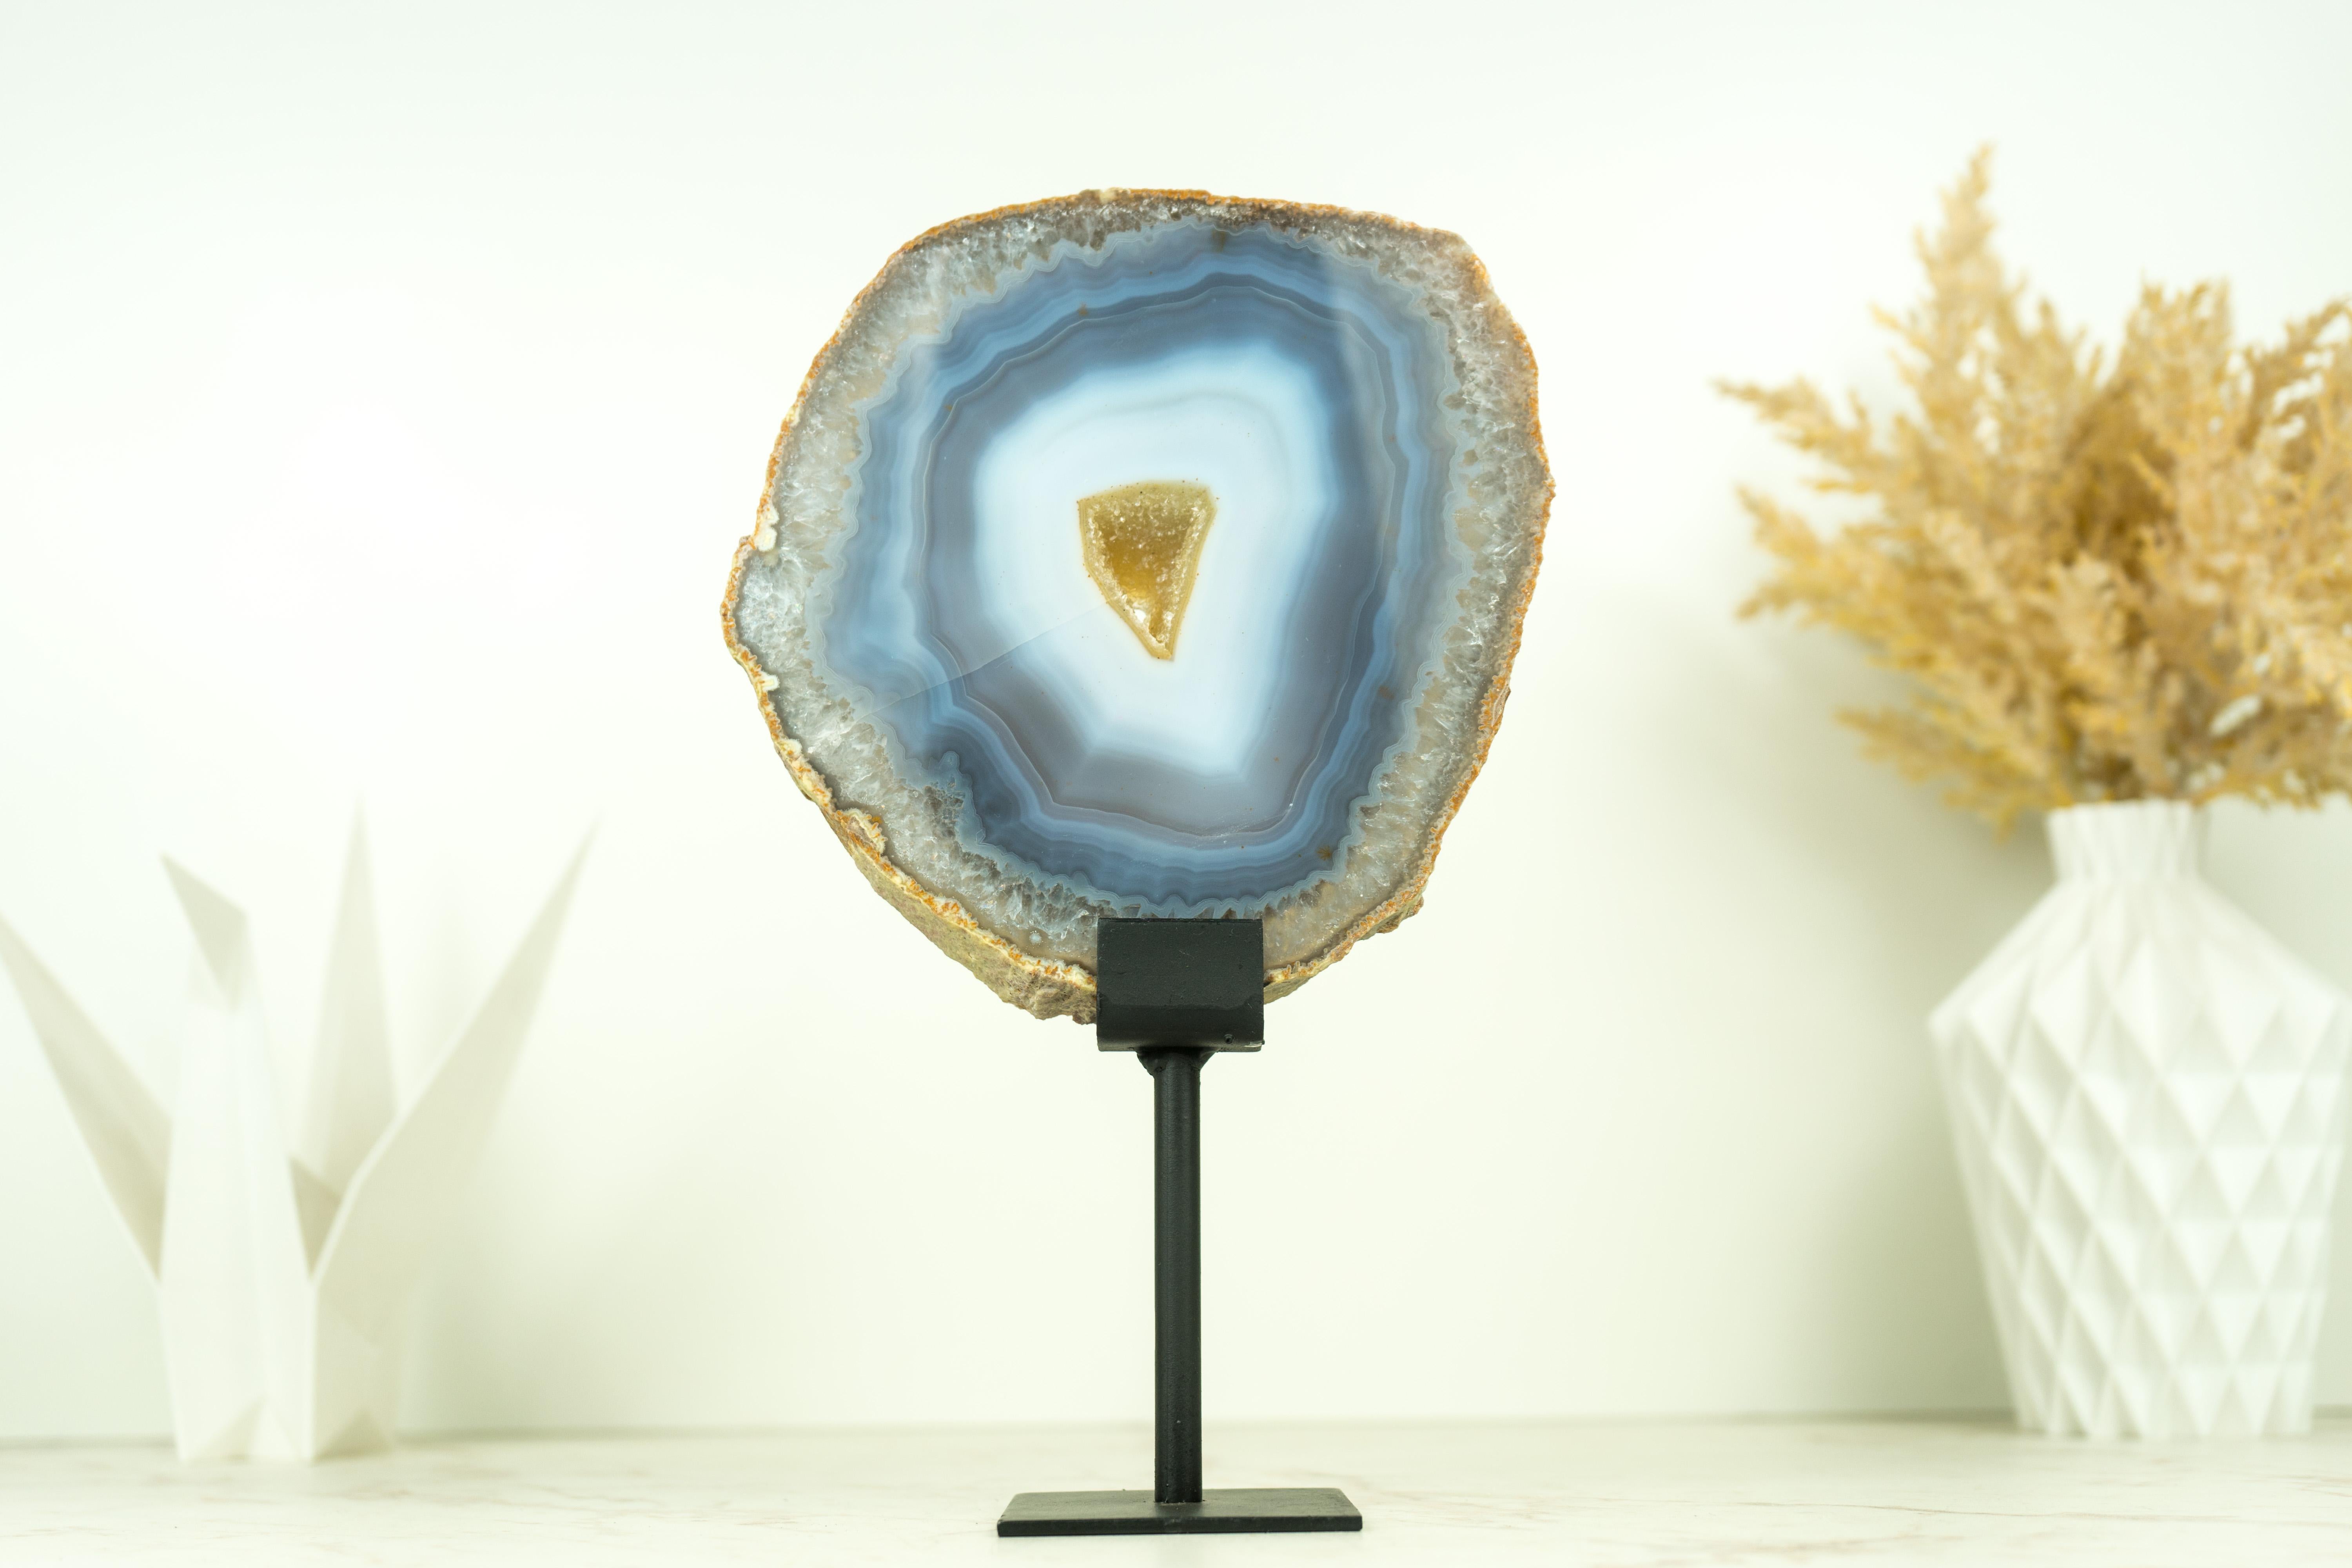 A superb Agate slice, showcasing rare agate colors and stunning aesthetics. This one-of-a-kind, super high-grade piece is a genuine artistic expression from Mother Nature, now available to you.

This rare Soledade Agate features beautiful and intact